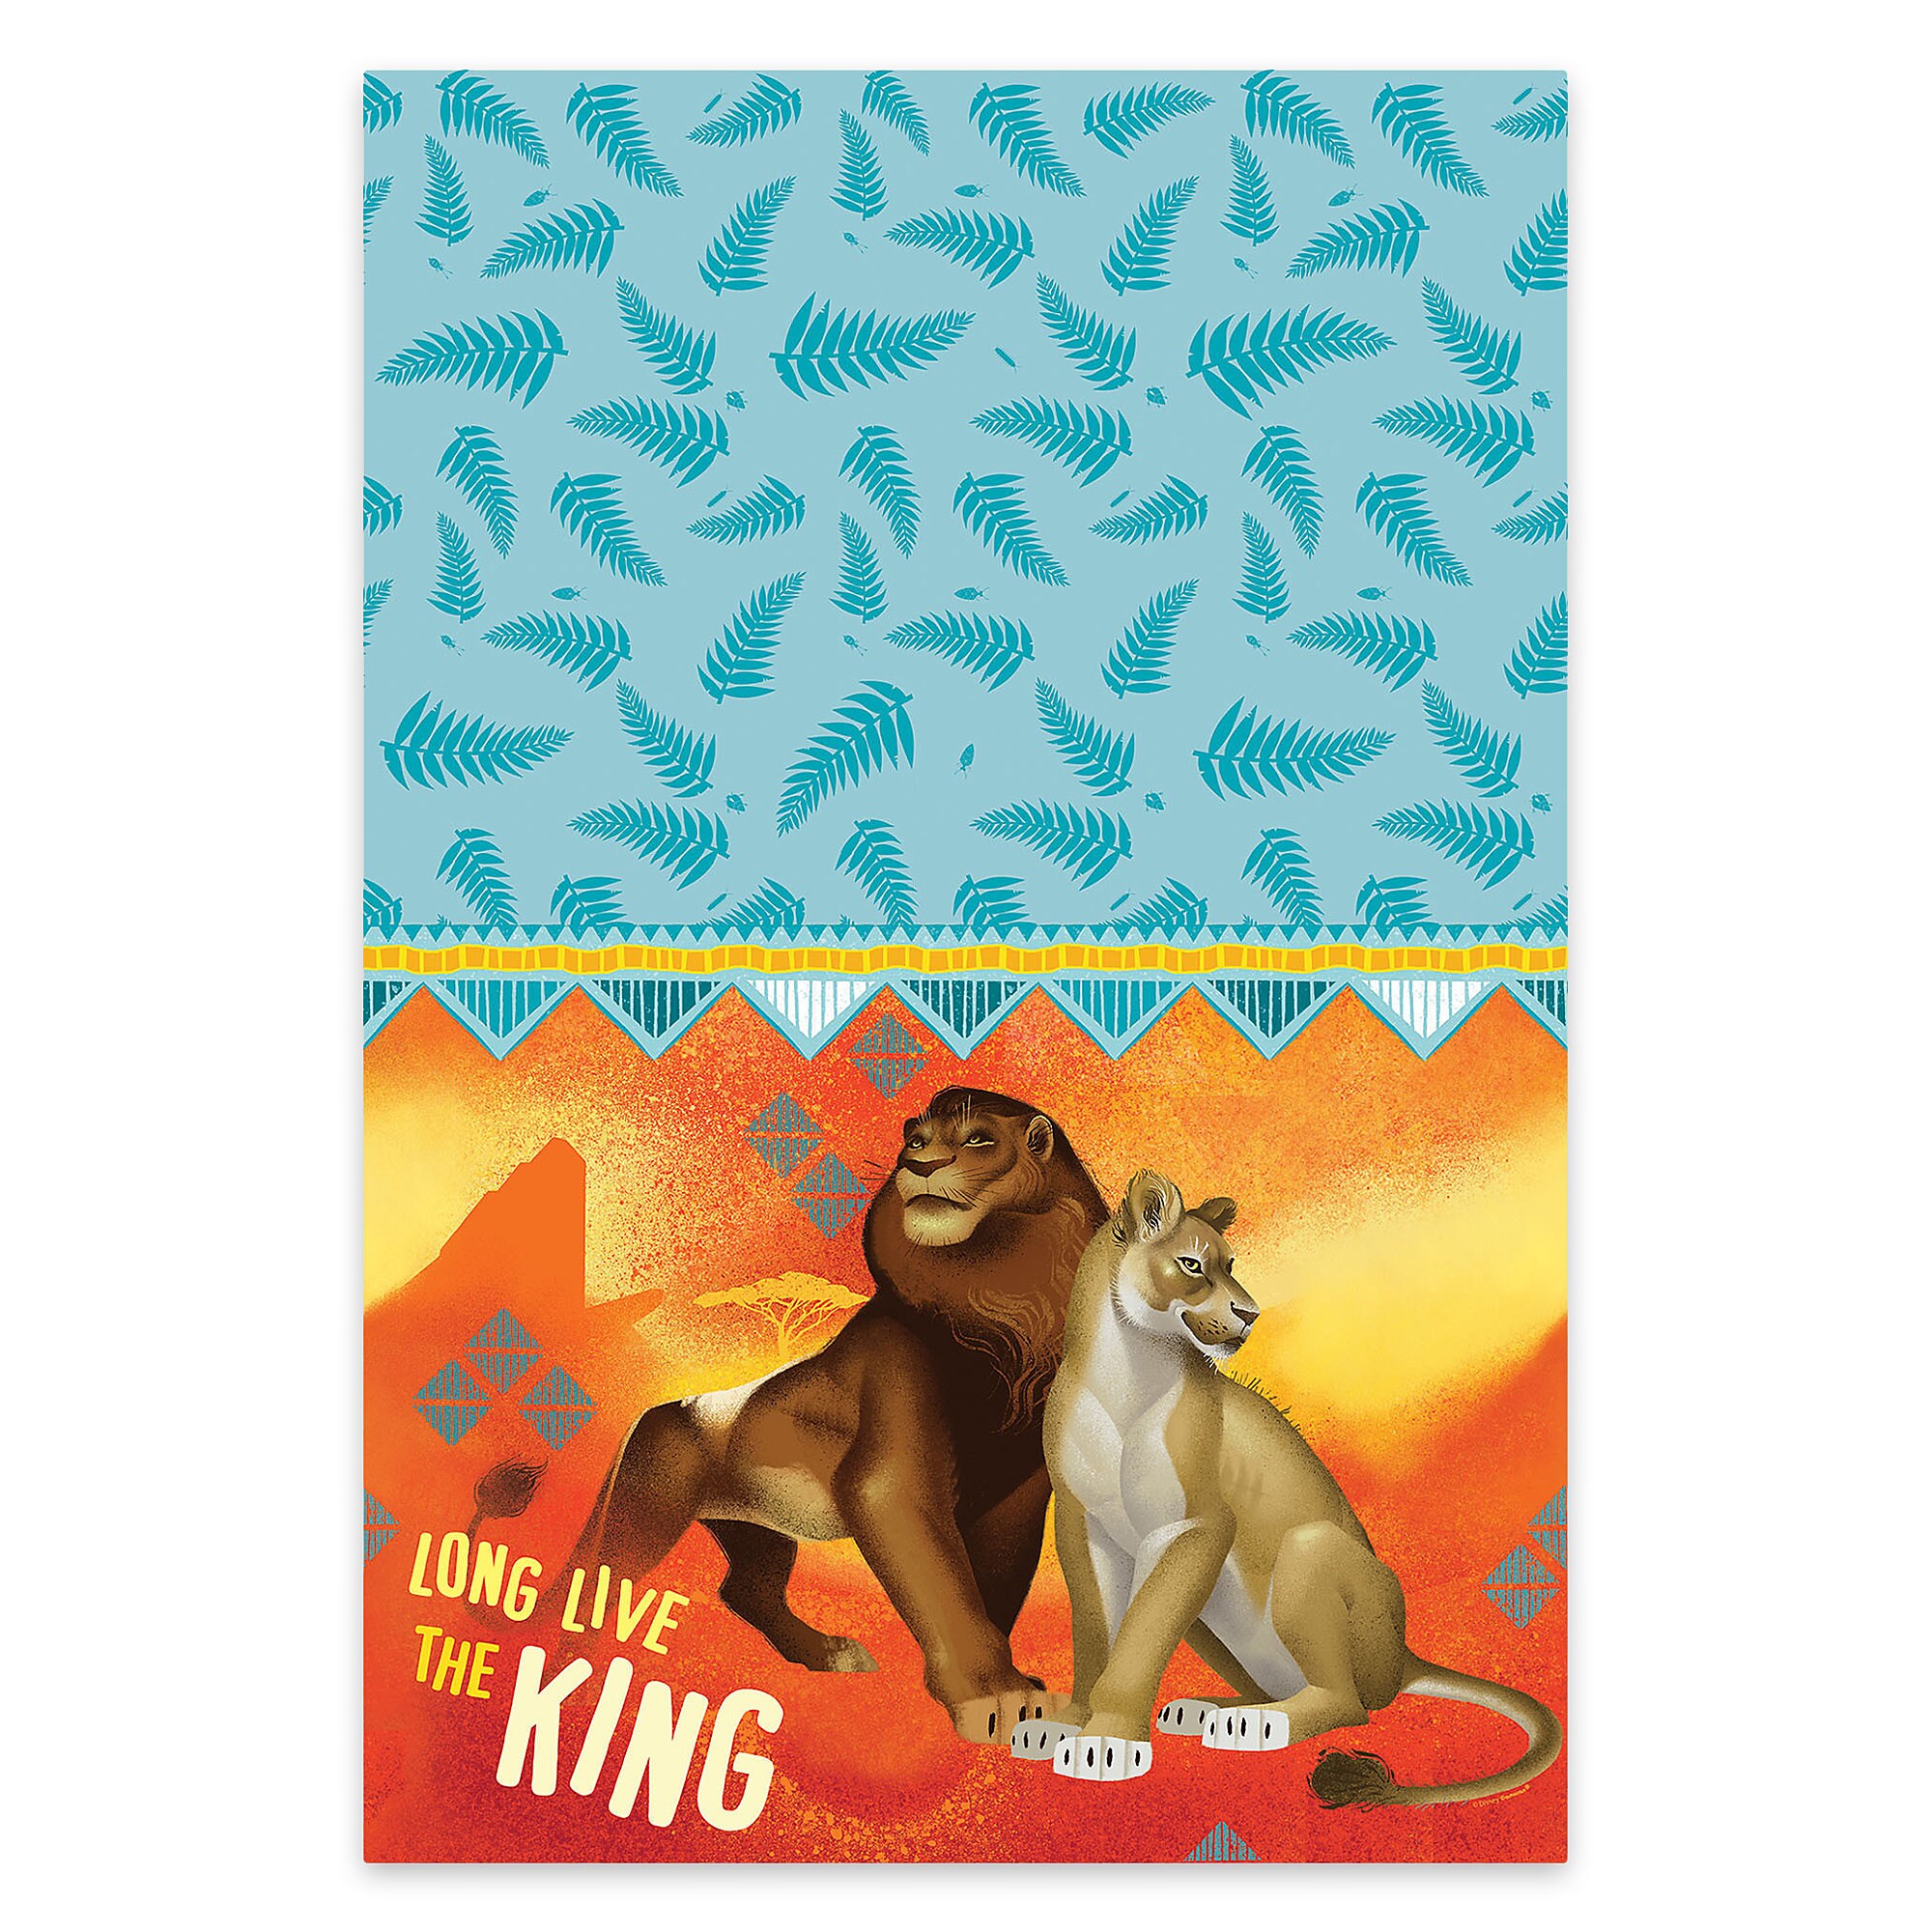 The Lion King 2019 Film Table Cover